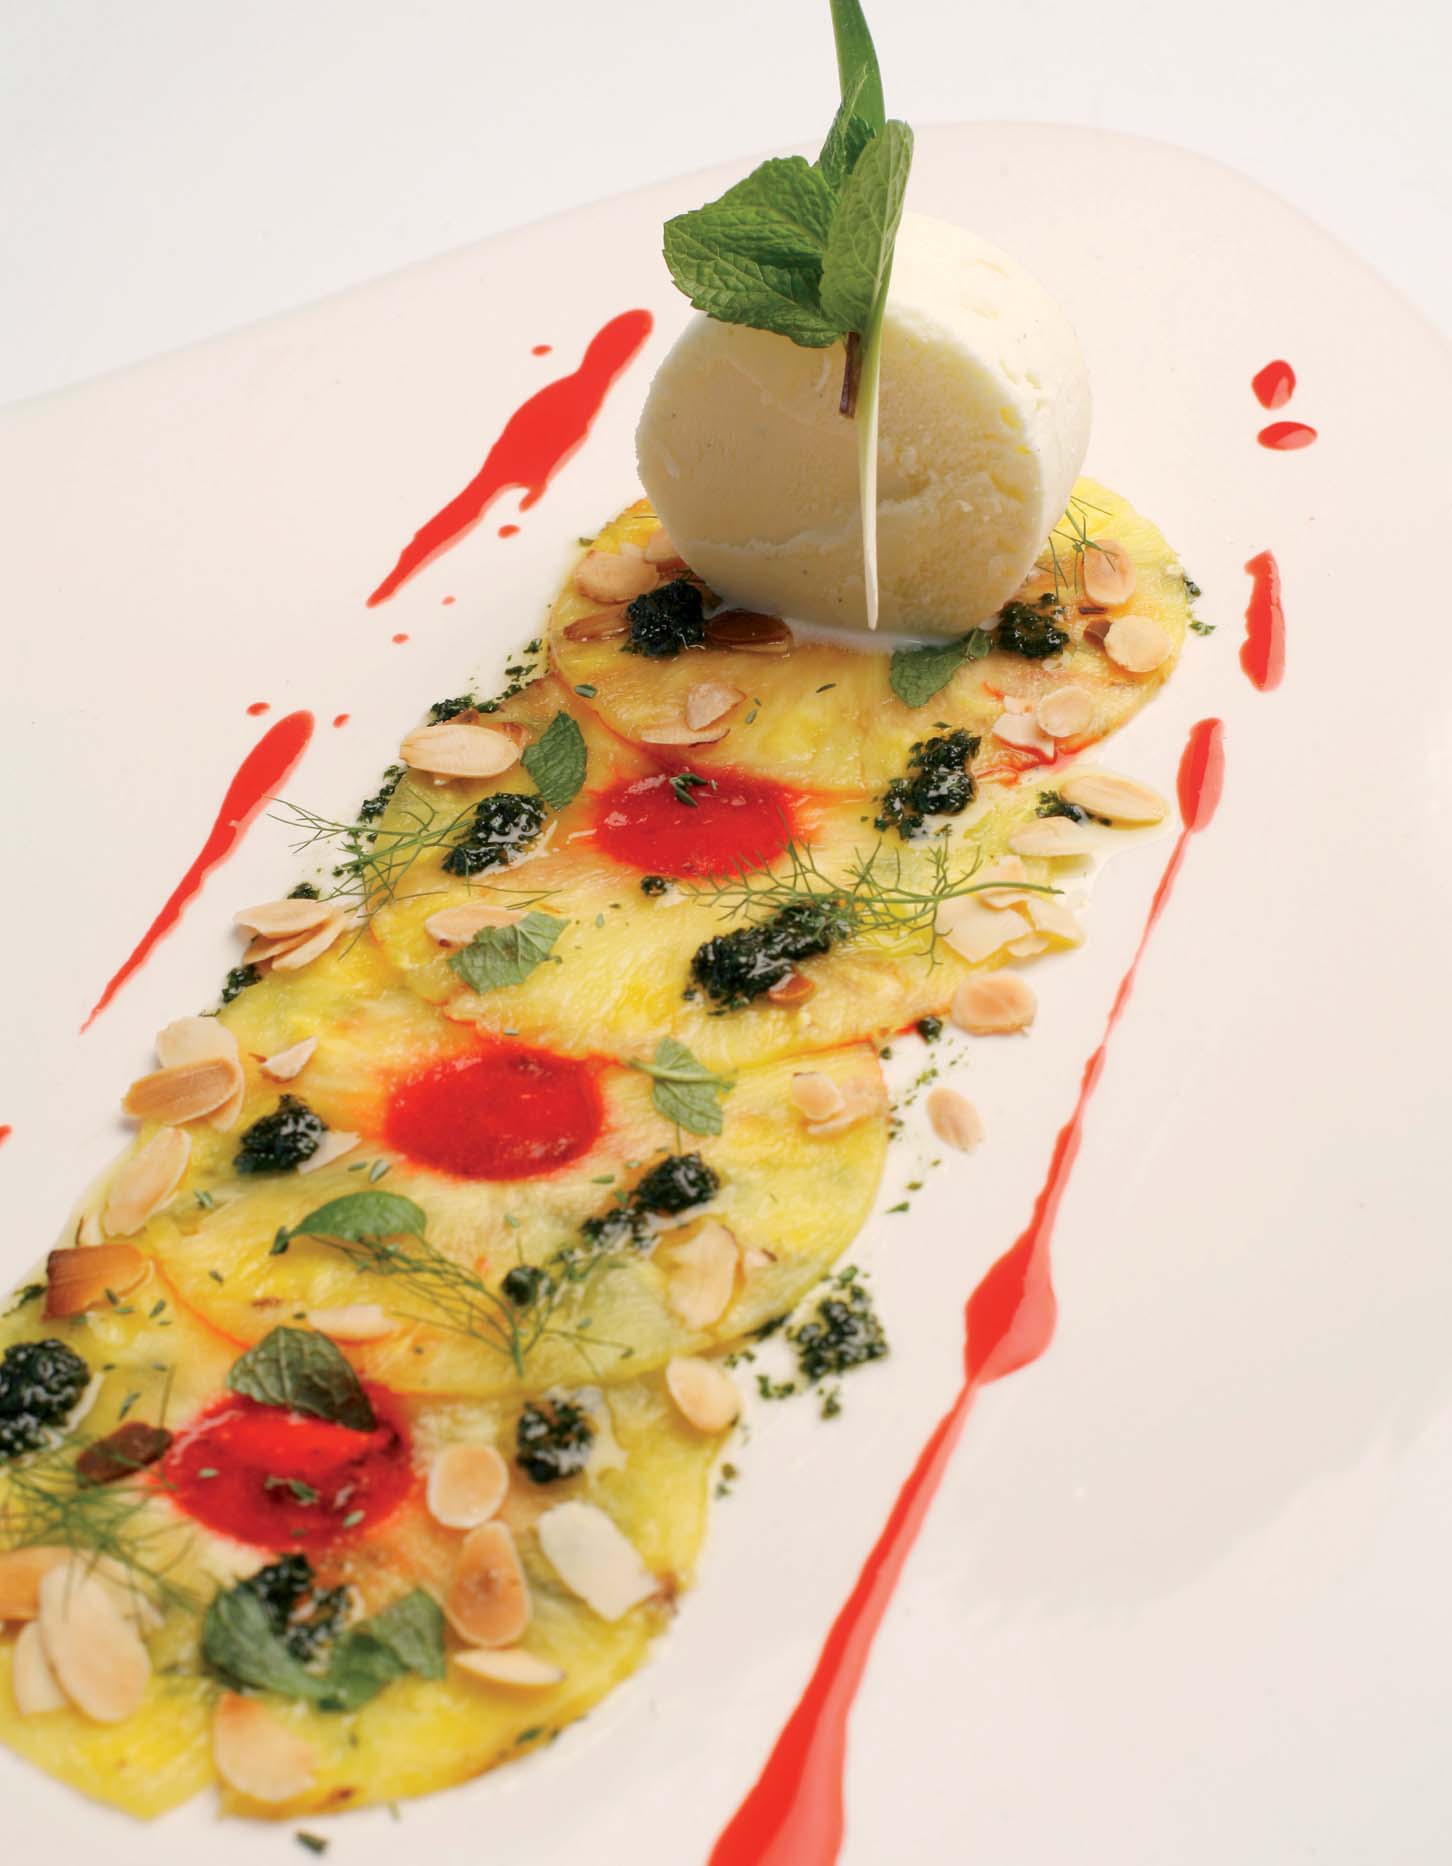 Tropical pineapple carpaccio with Mallorcan olive oil and almond parfait - Recipes - Gastronomy - Balearic Islands - Agrifoodstuffs, designations of origin and Balearic gastronomy